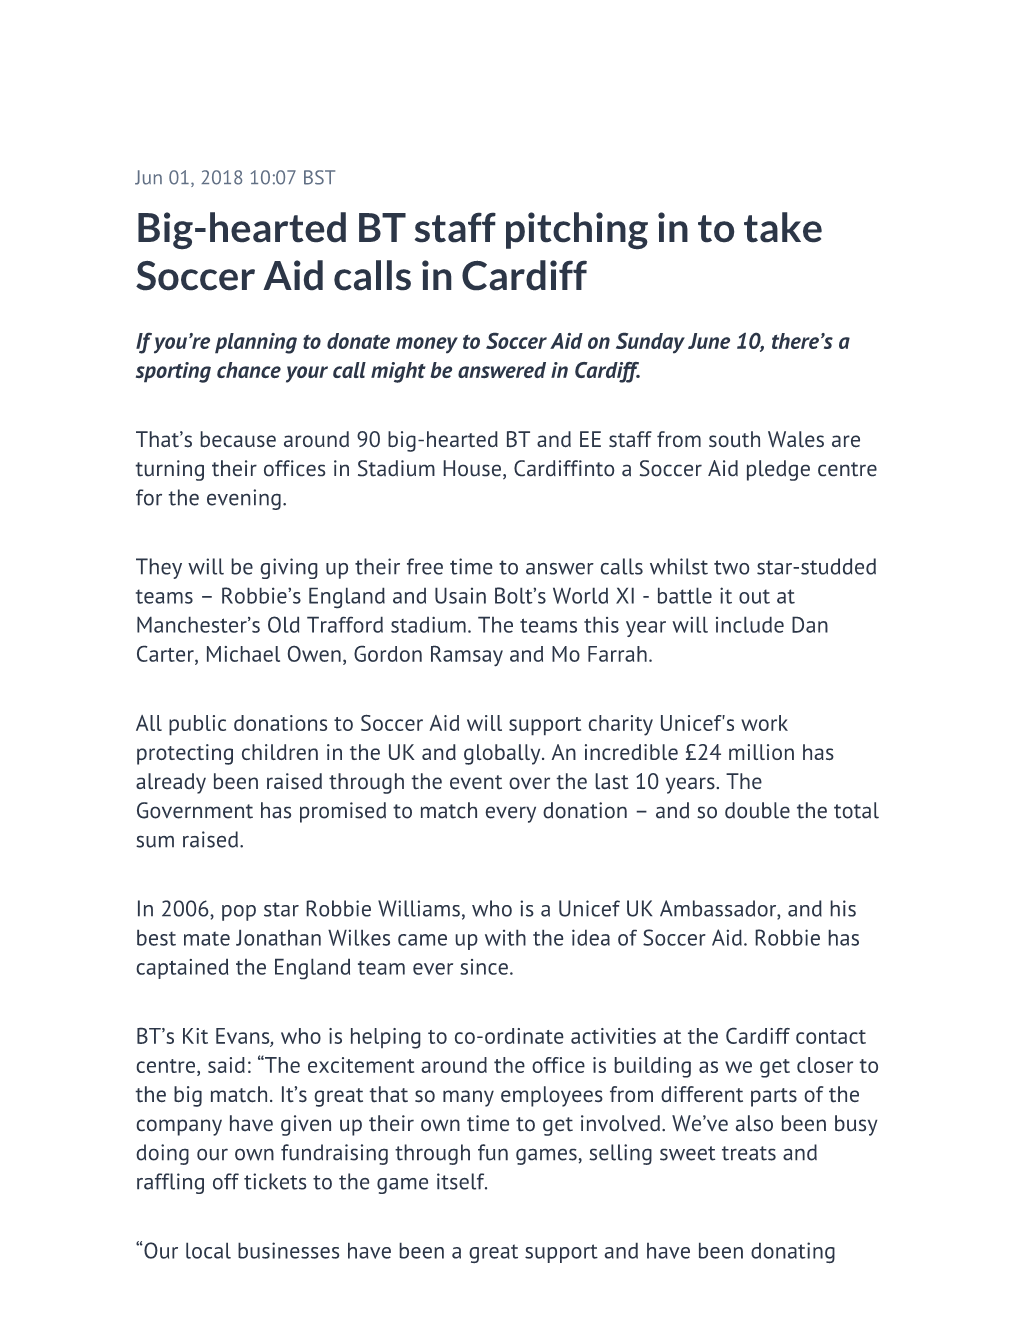 Big-Hearted BT Staff Pitching in to Take Soccer Aid Calls in Cardiff